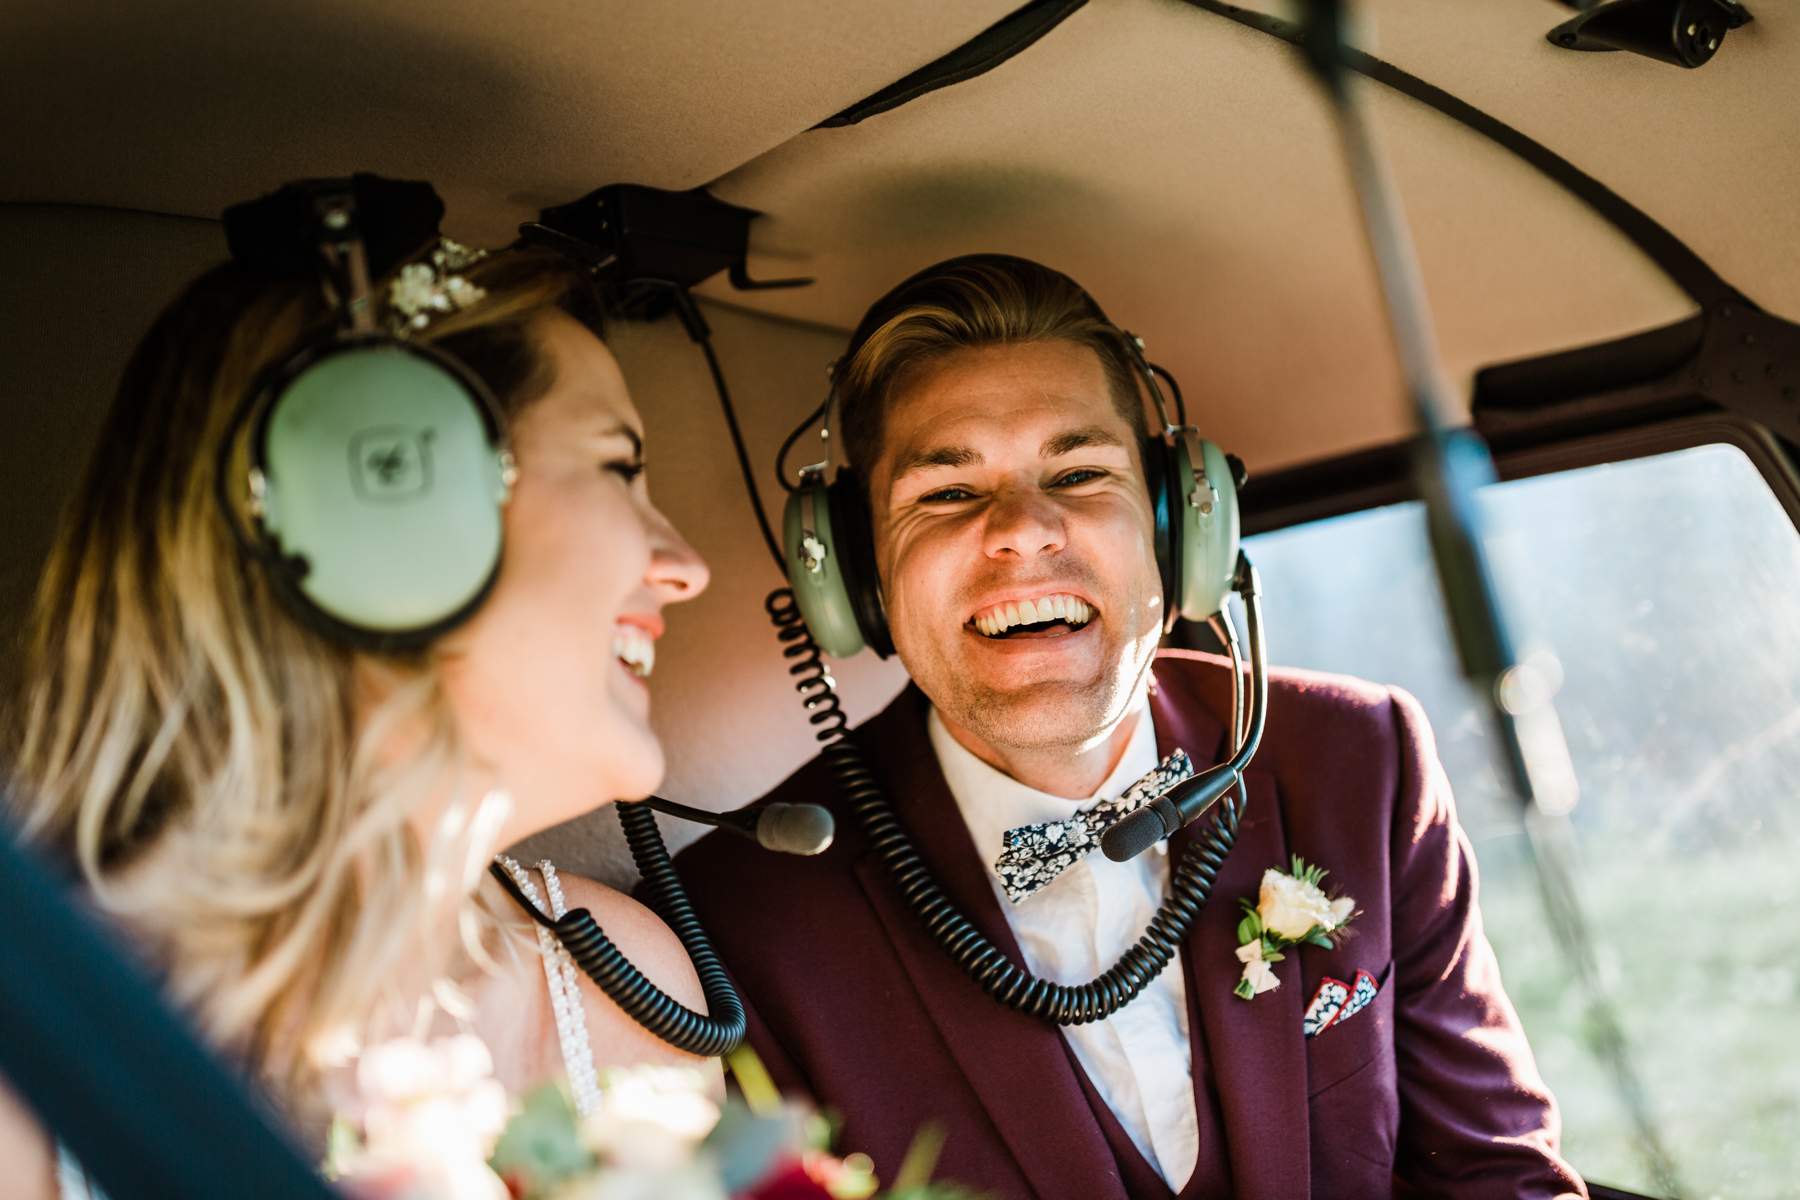 Banff Helicopter Elopement Photographers - Image 33